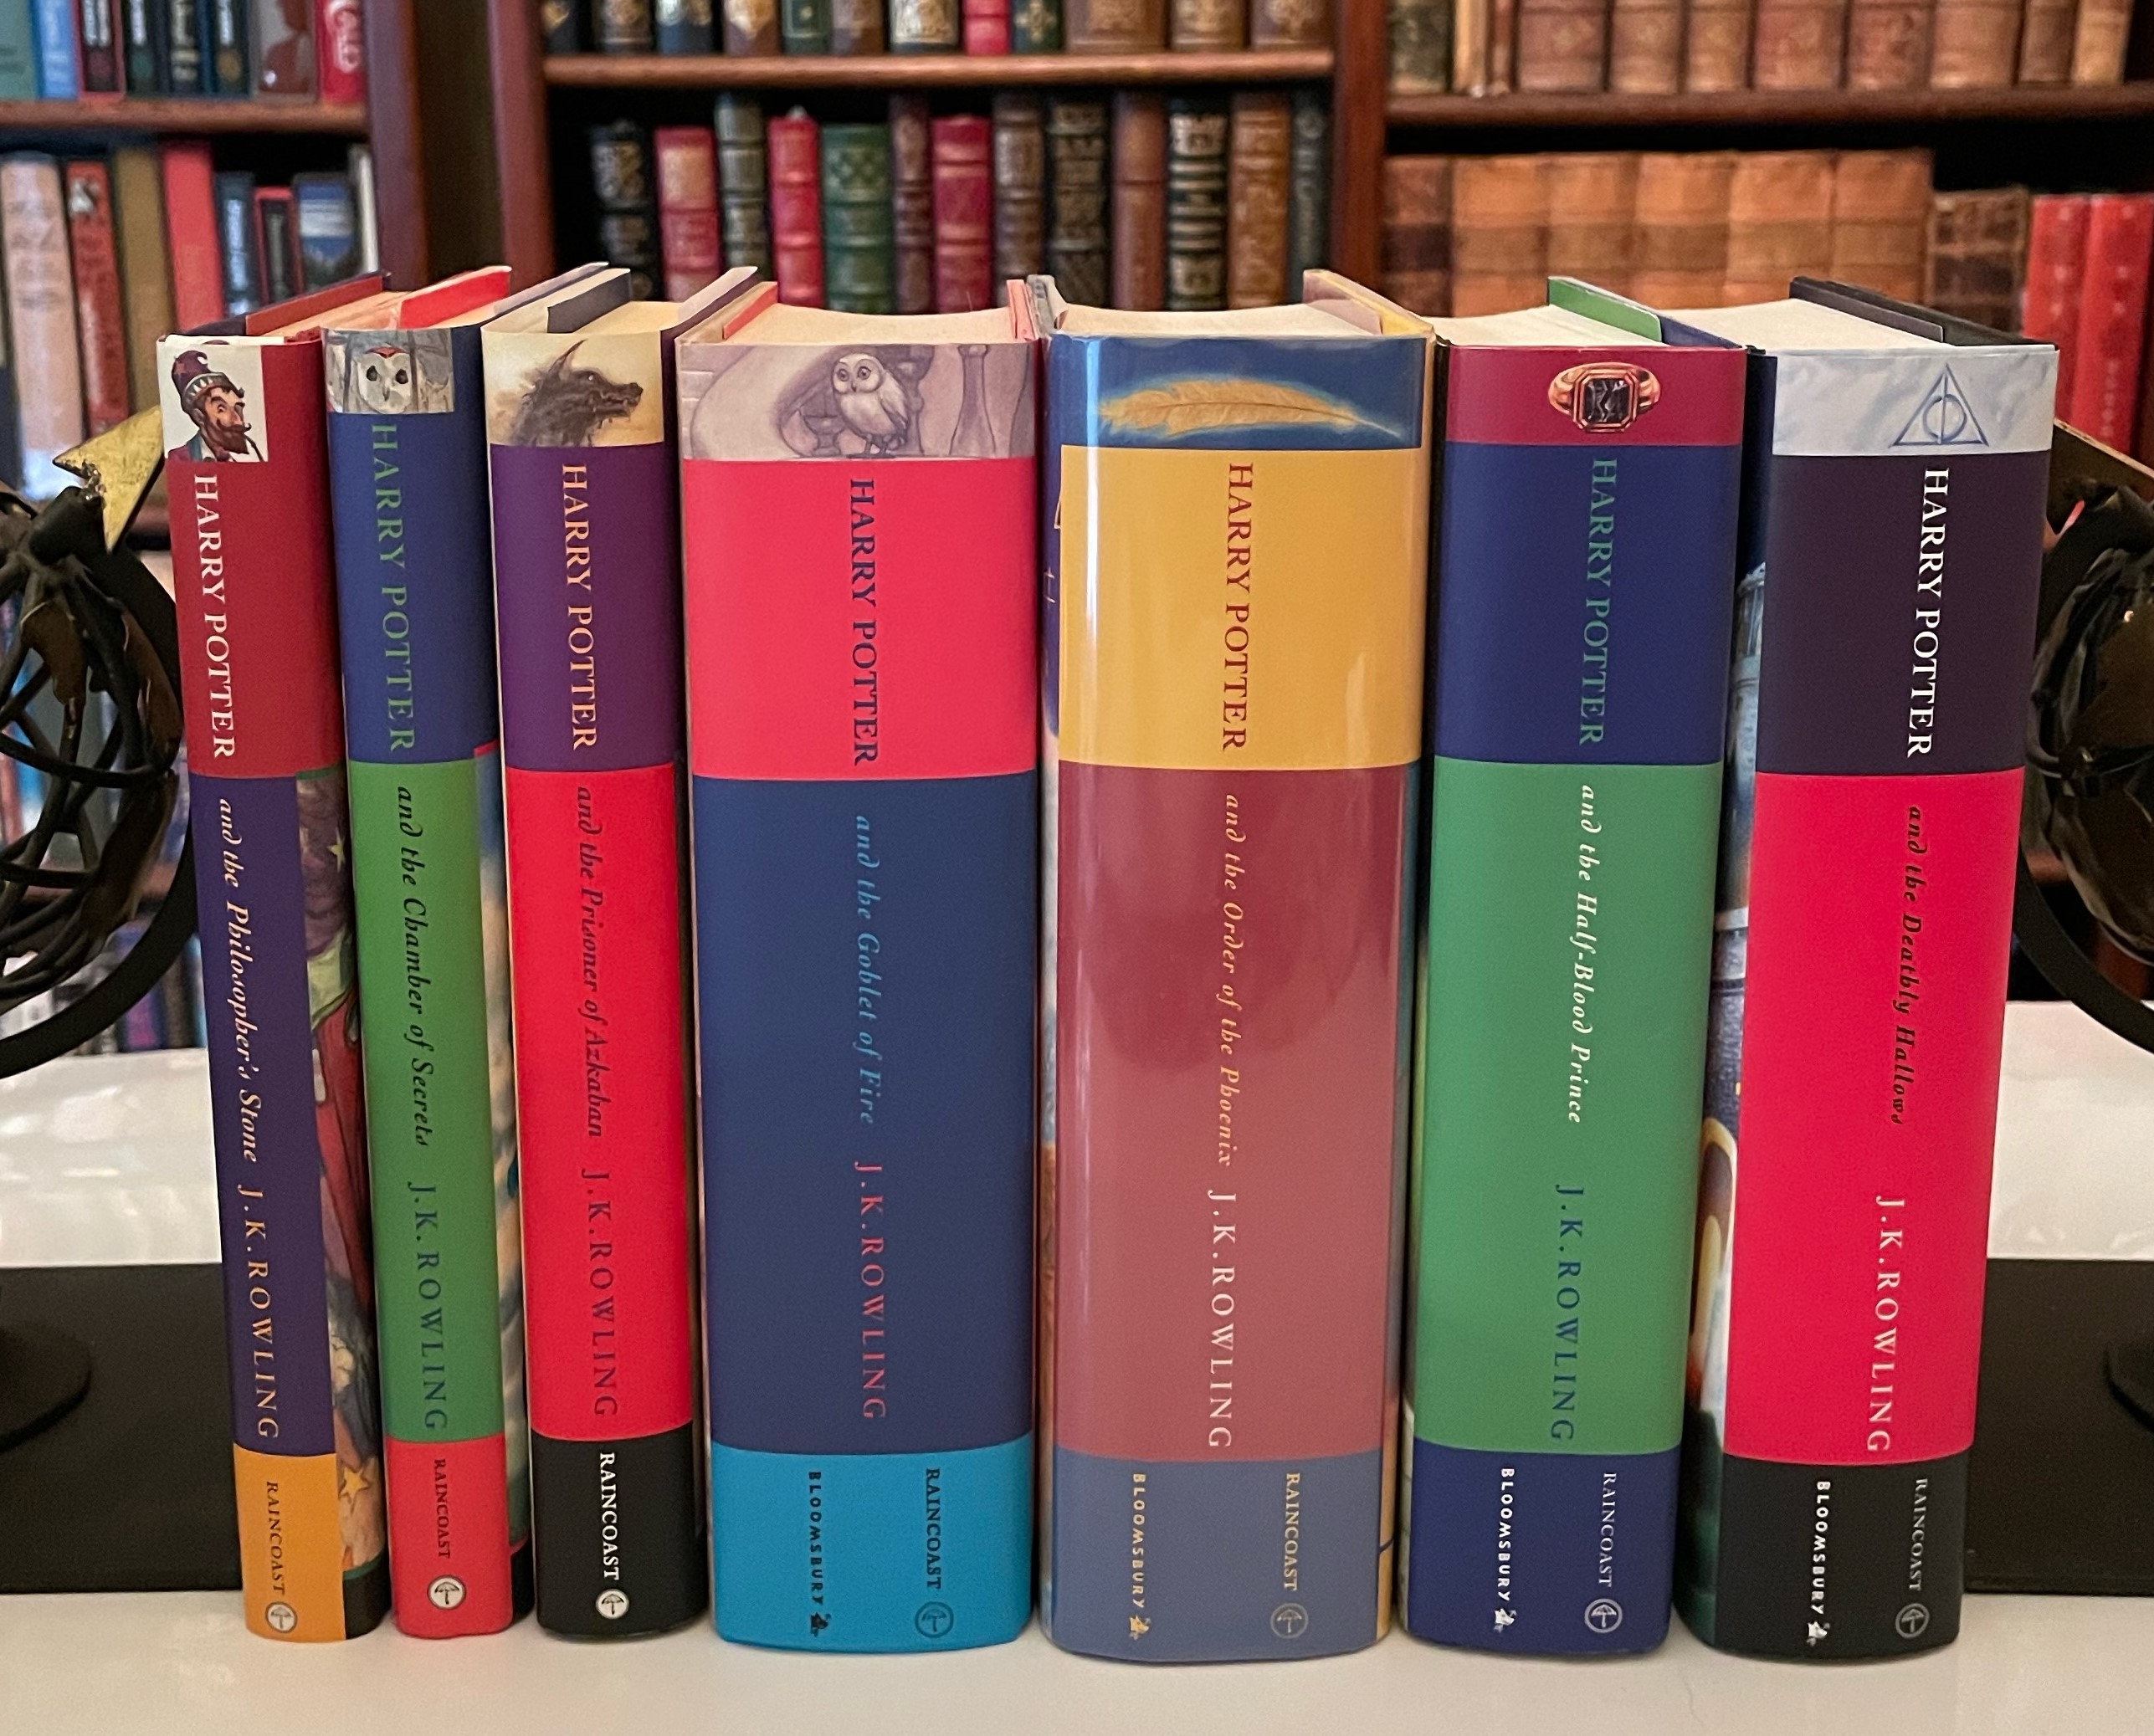 1-st Edition Harry Potter Full Book Set Volumes 1-7 Hardcover